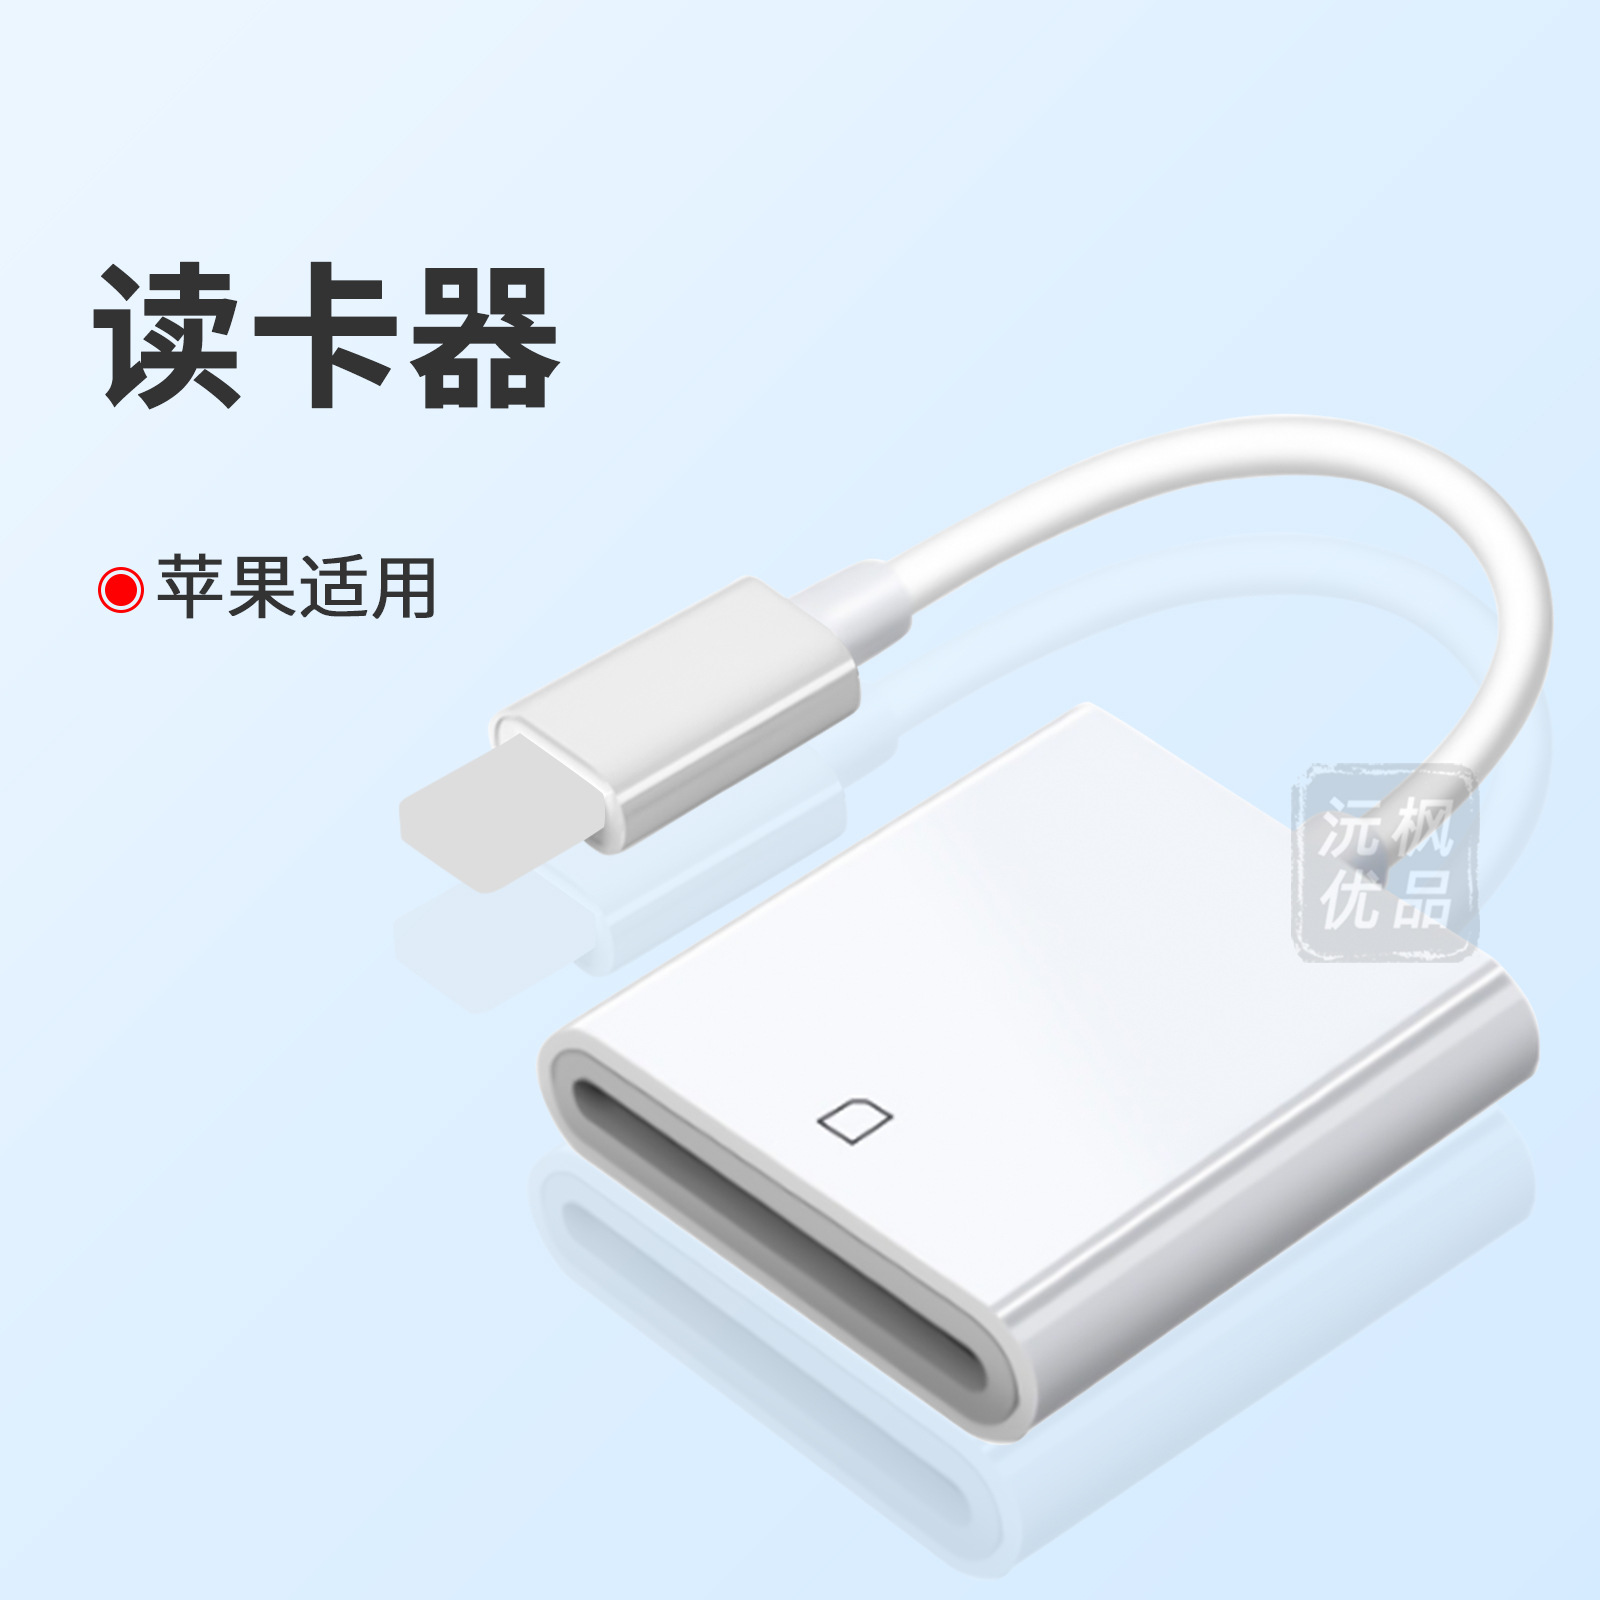 iphone Applicable to Usb to Huawei Mobile Phone Card Reader Otg Transmission Read Tf/Sd Card Apple Usb Flash Disk Converter